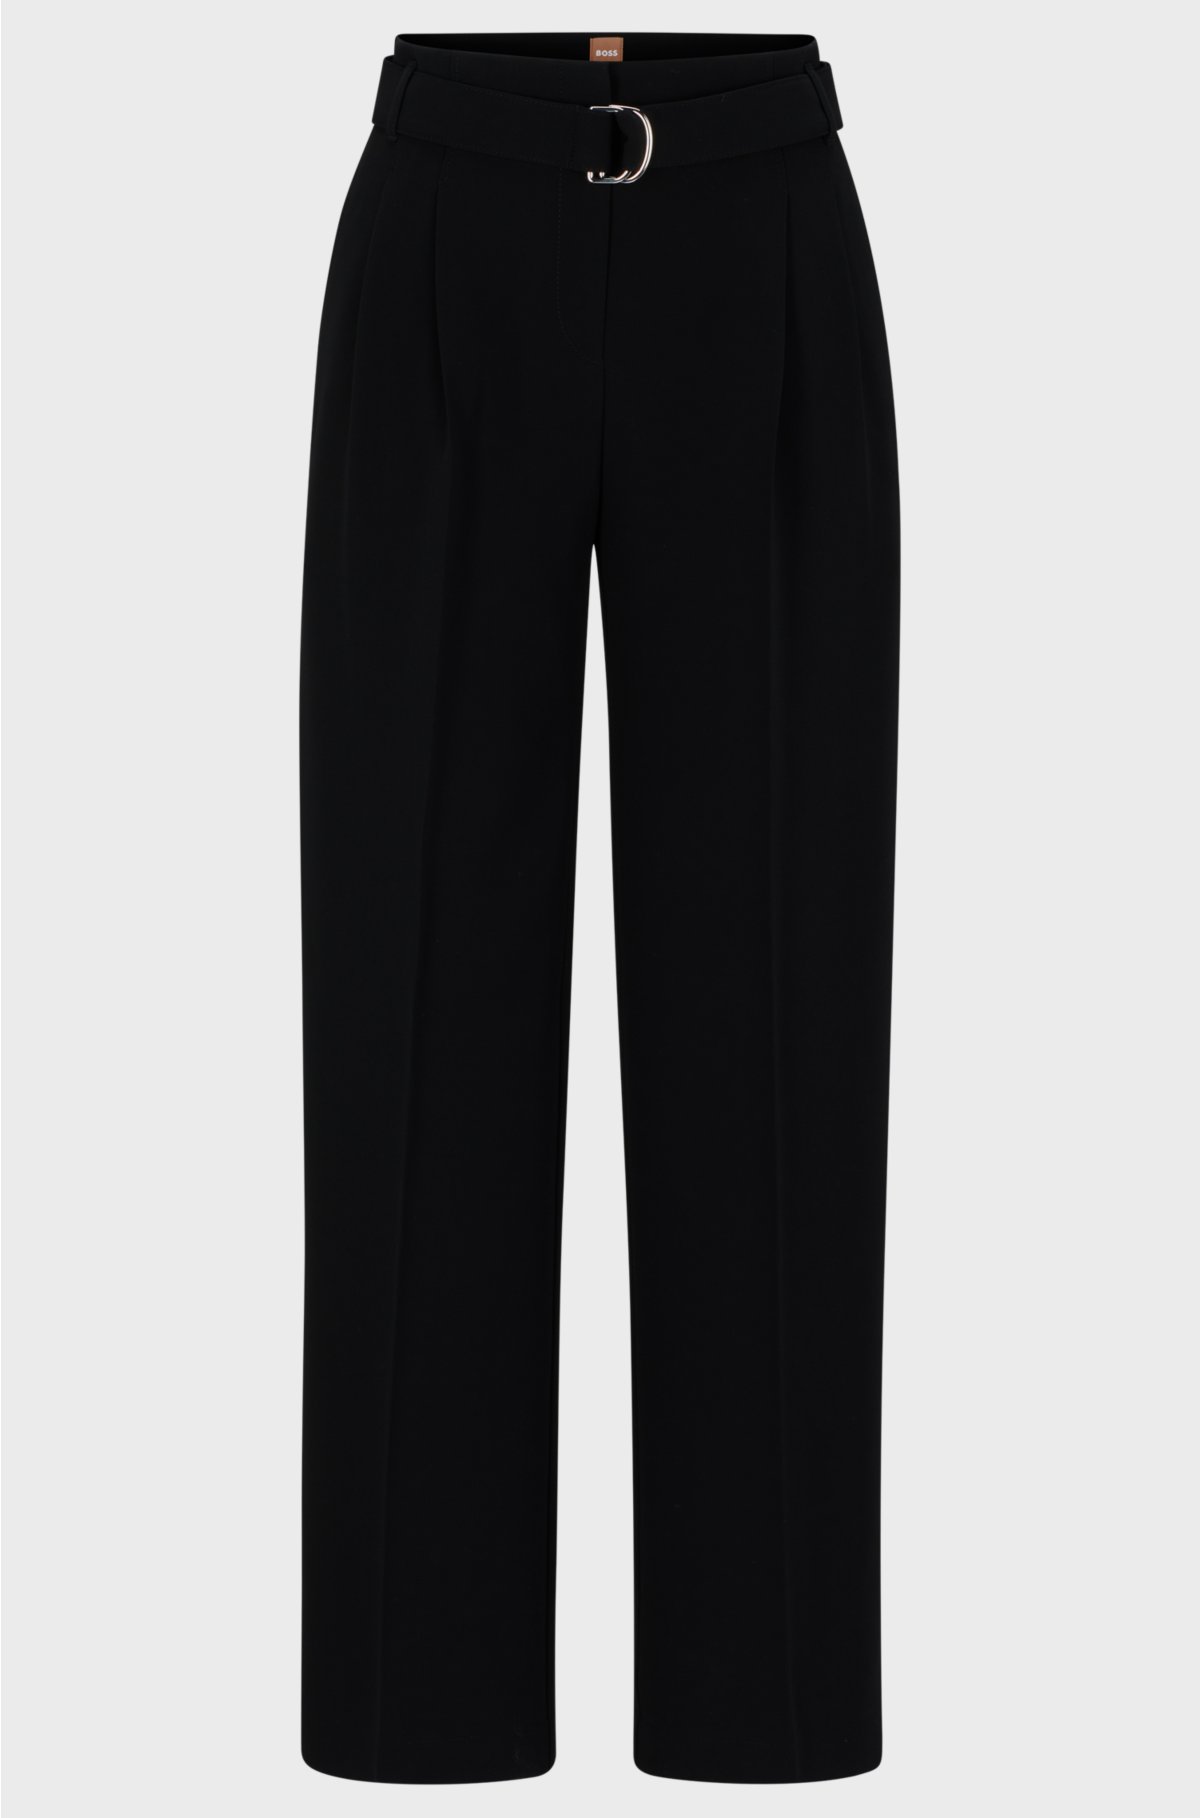 Relaxed-fit trousers in crease-resistant Japanese crepe, Black